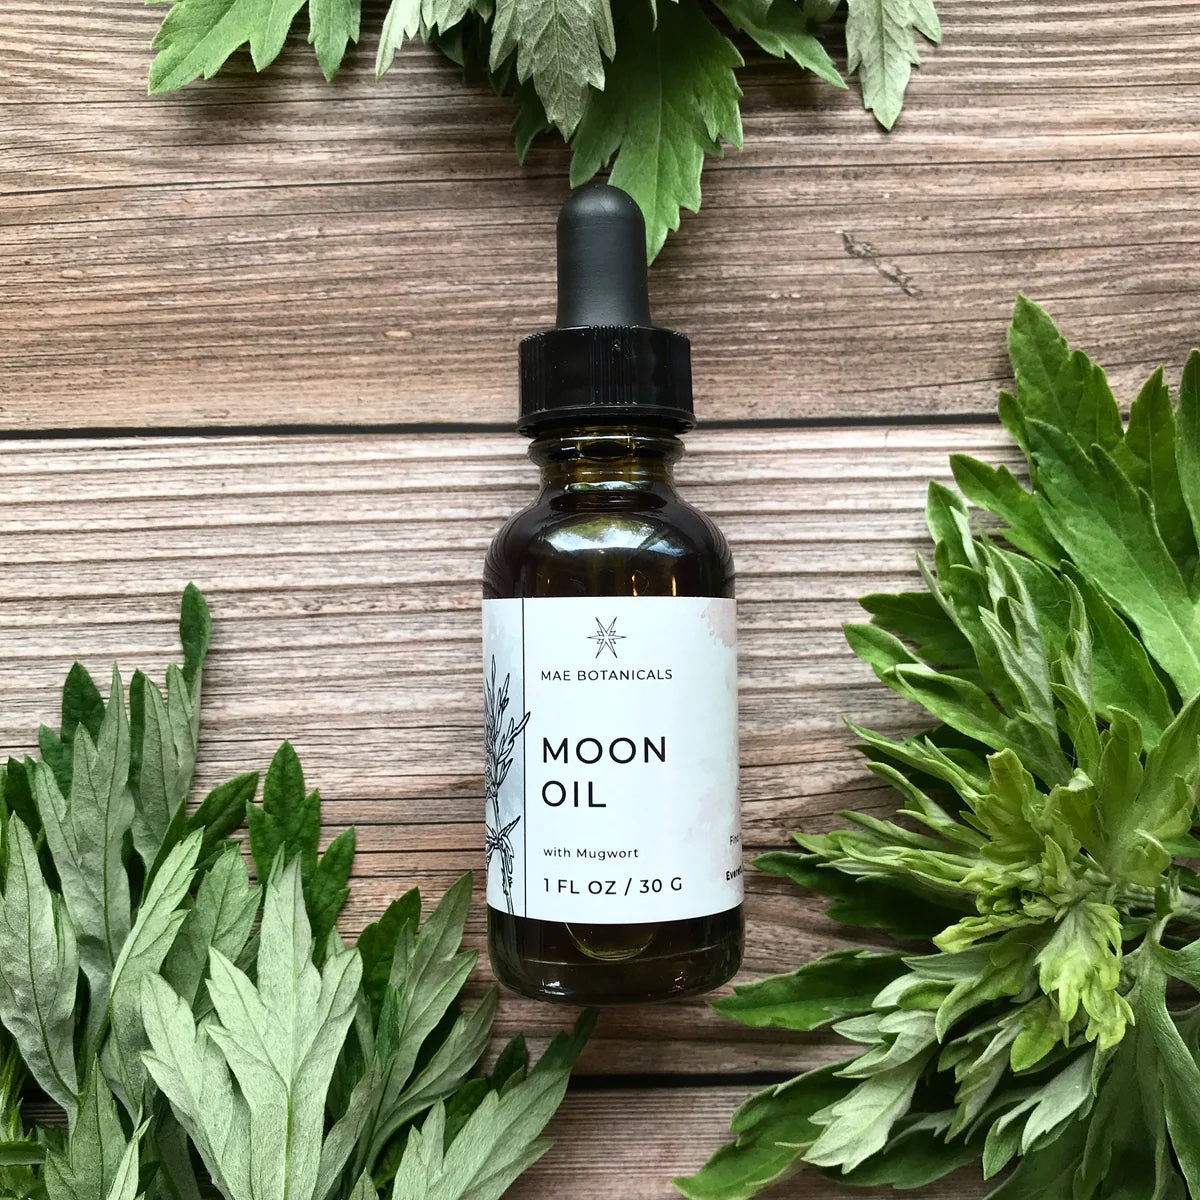 1oz bottle of Moon Oil on a wooden table with leaves